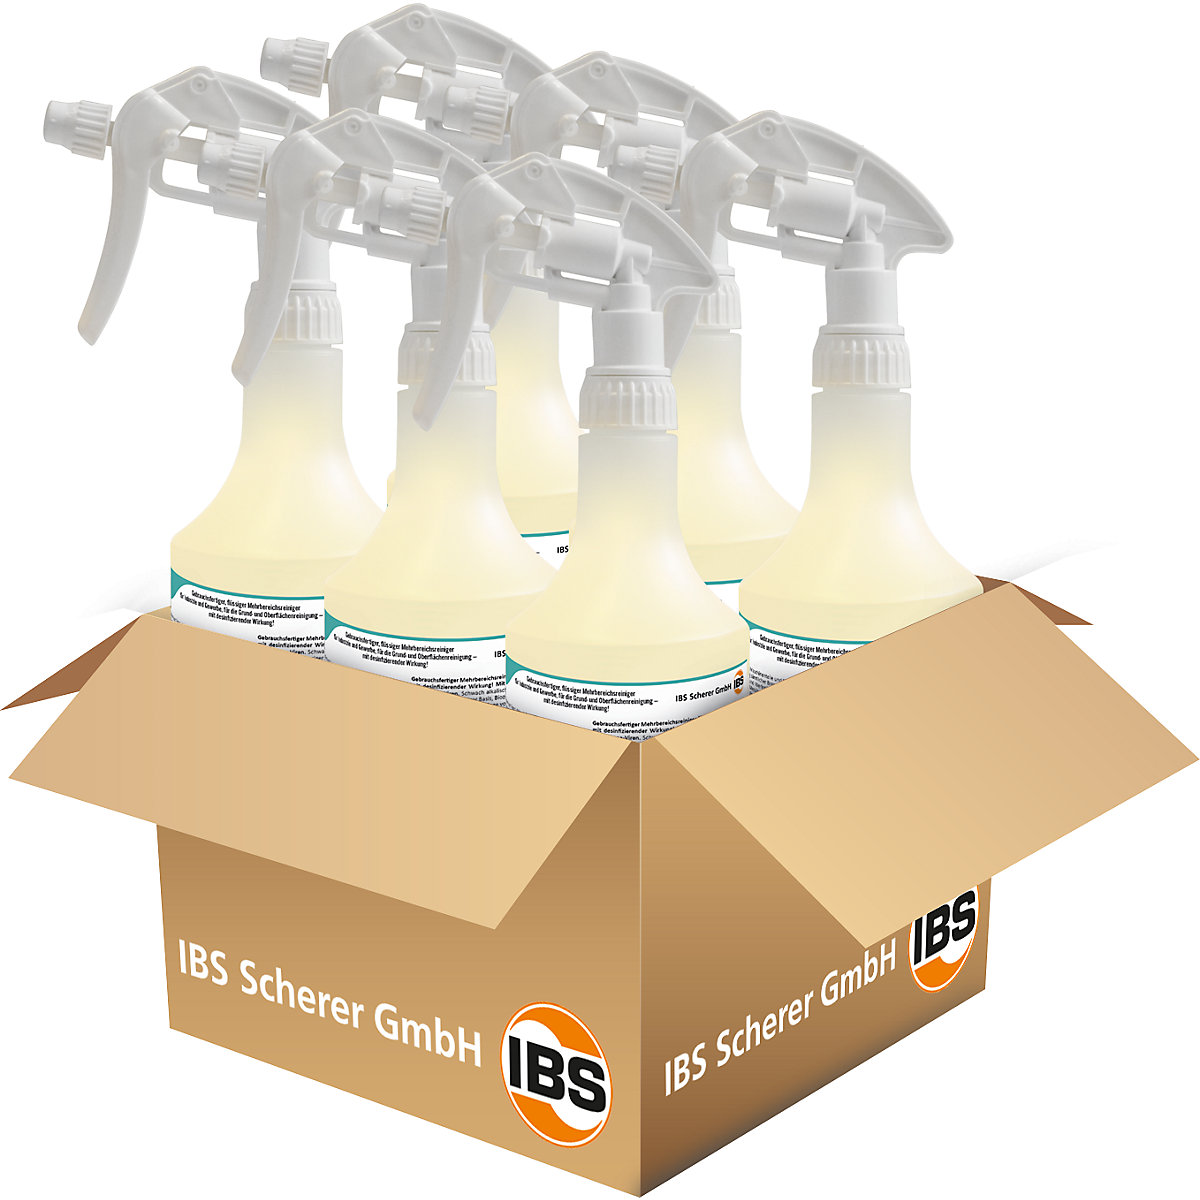 WAS 50.500 special cleaning solution - IBS Scherer